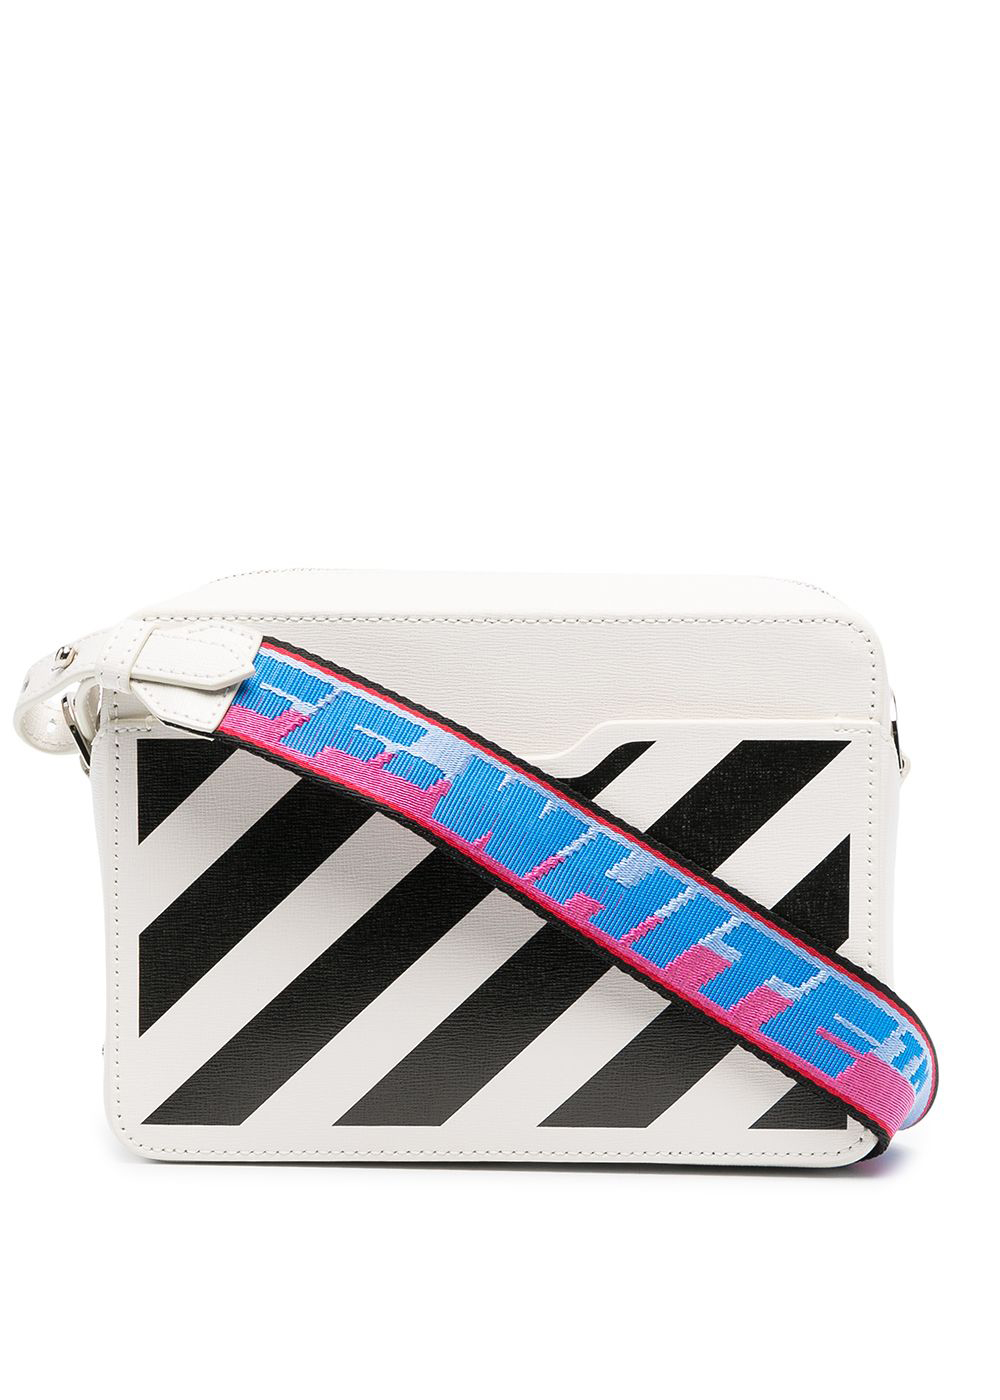 OFF-WHITE Diag Camera Bag Black/White with Red/Blue Strap in 